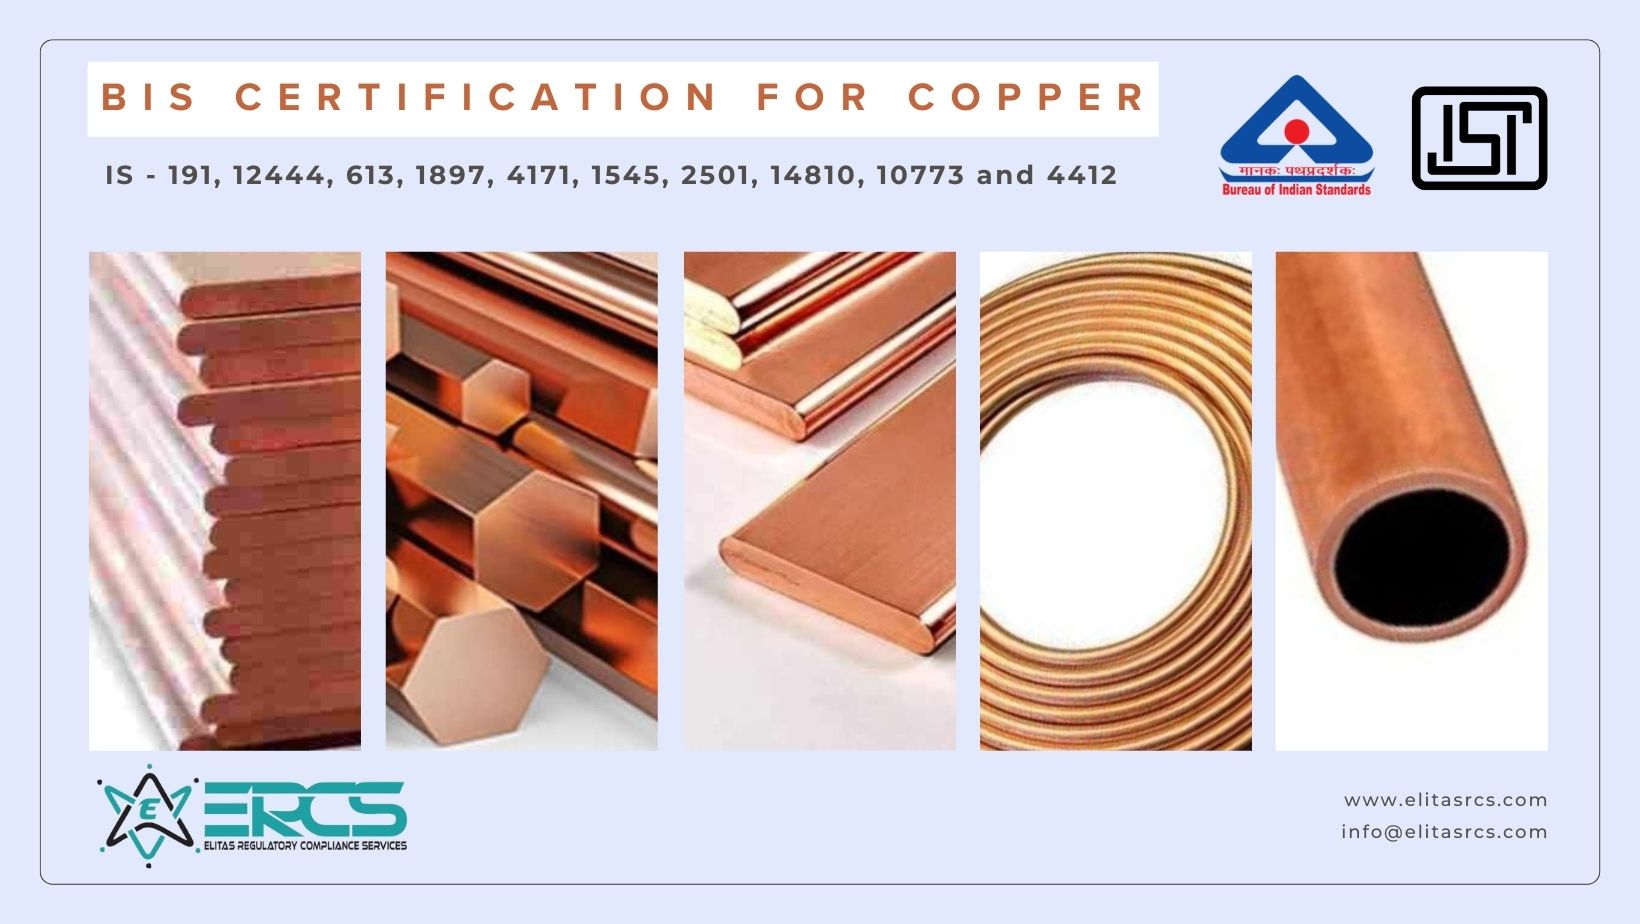 BIS Certification for Copper Products